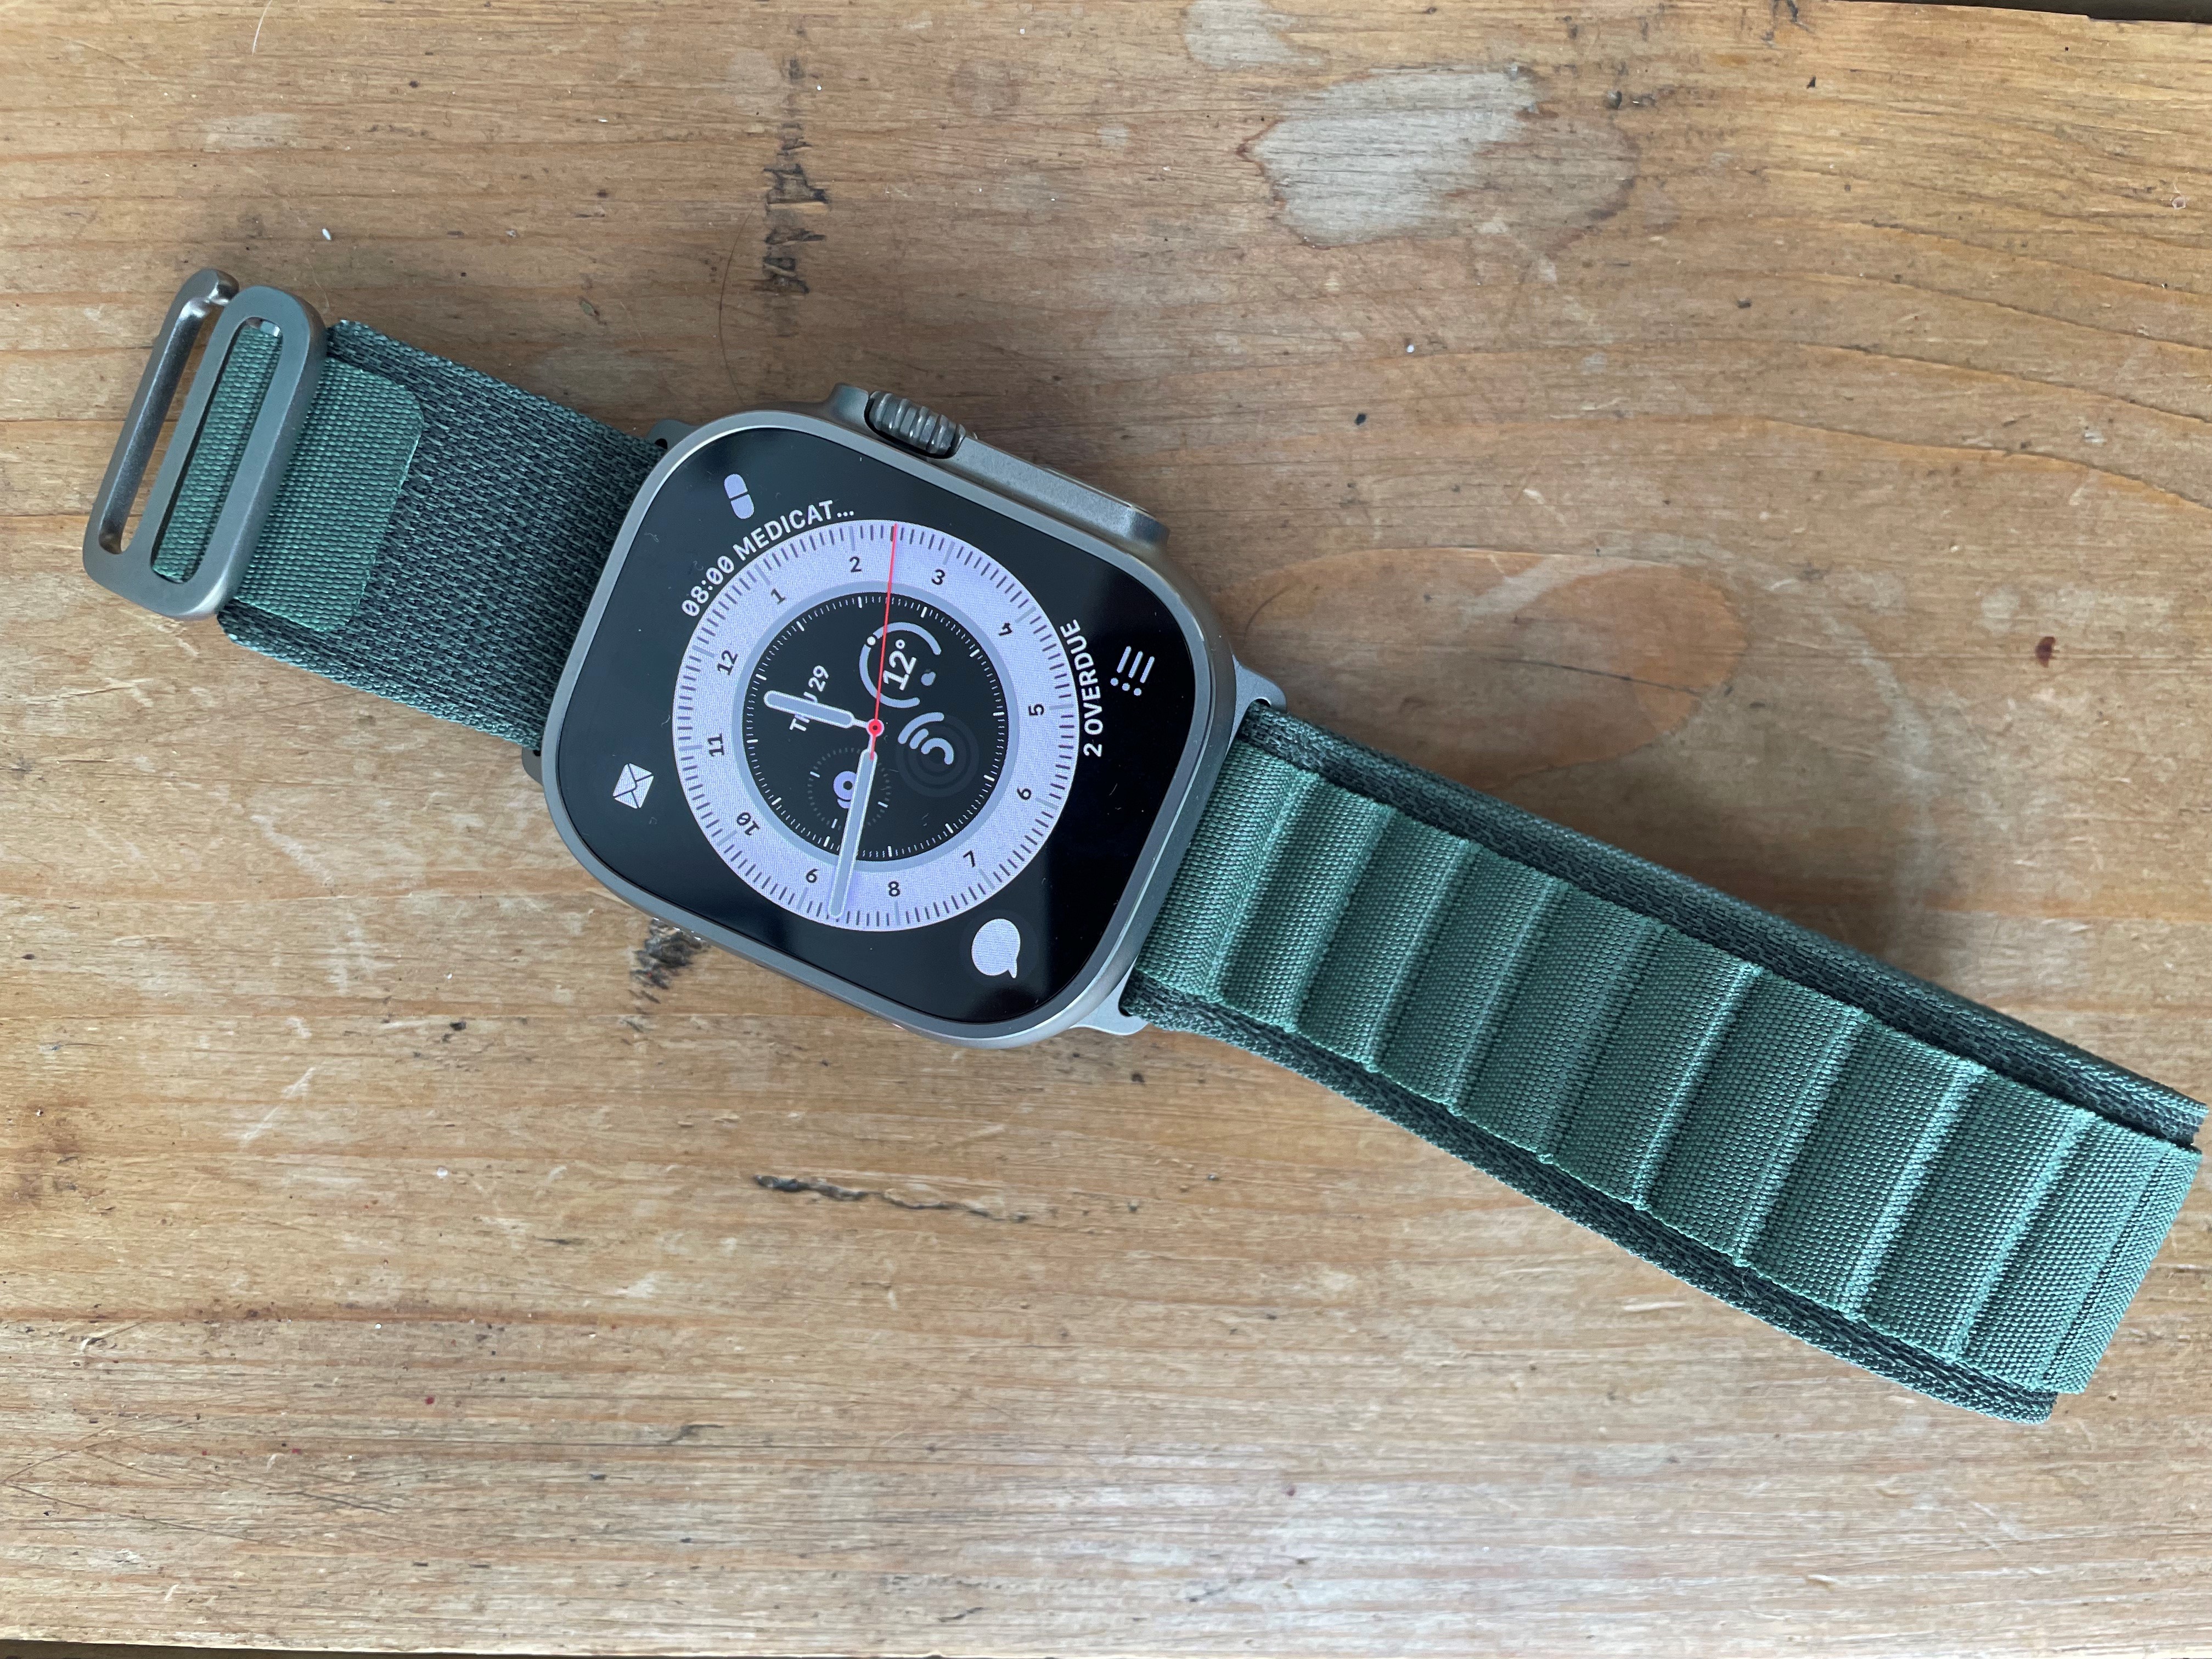 Apple Watch Ultra review: The best Apple Watch yet?